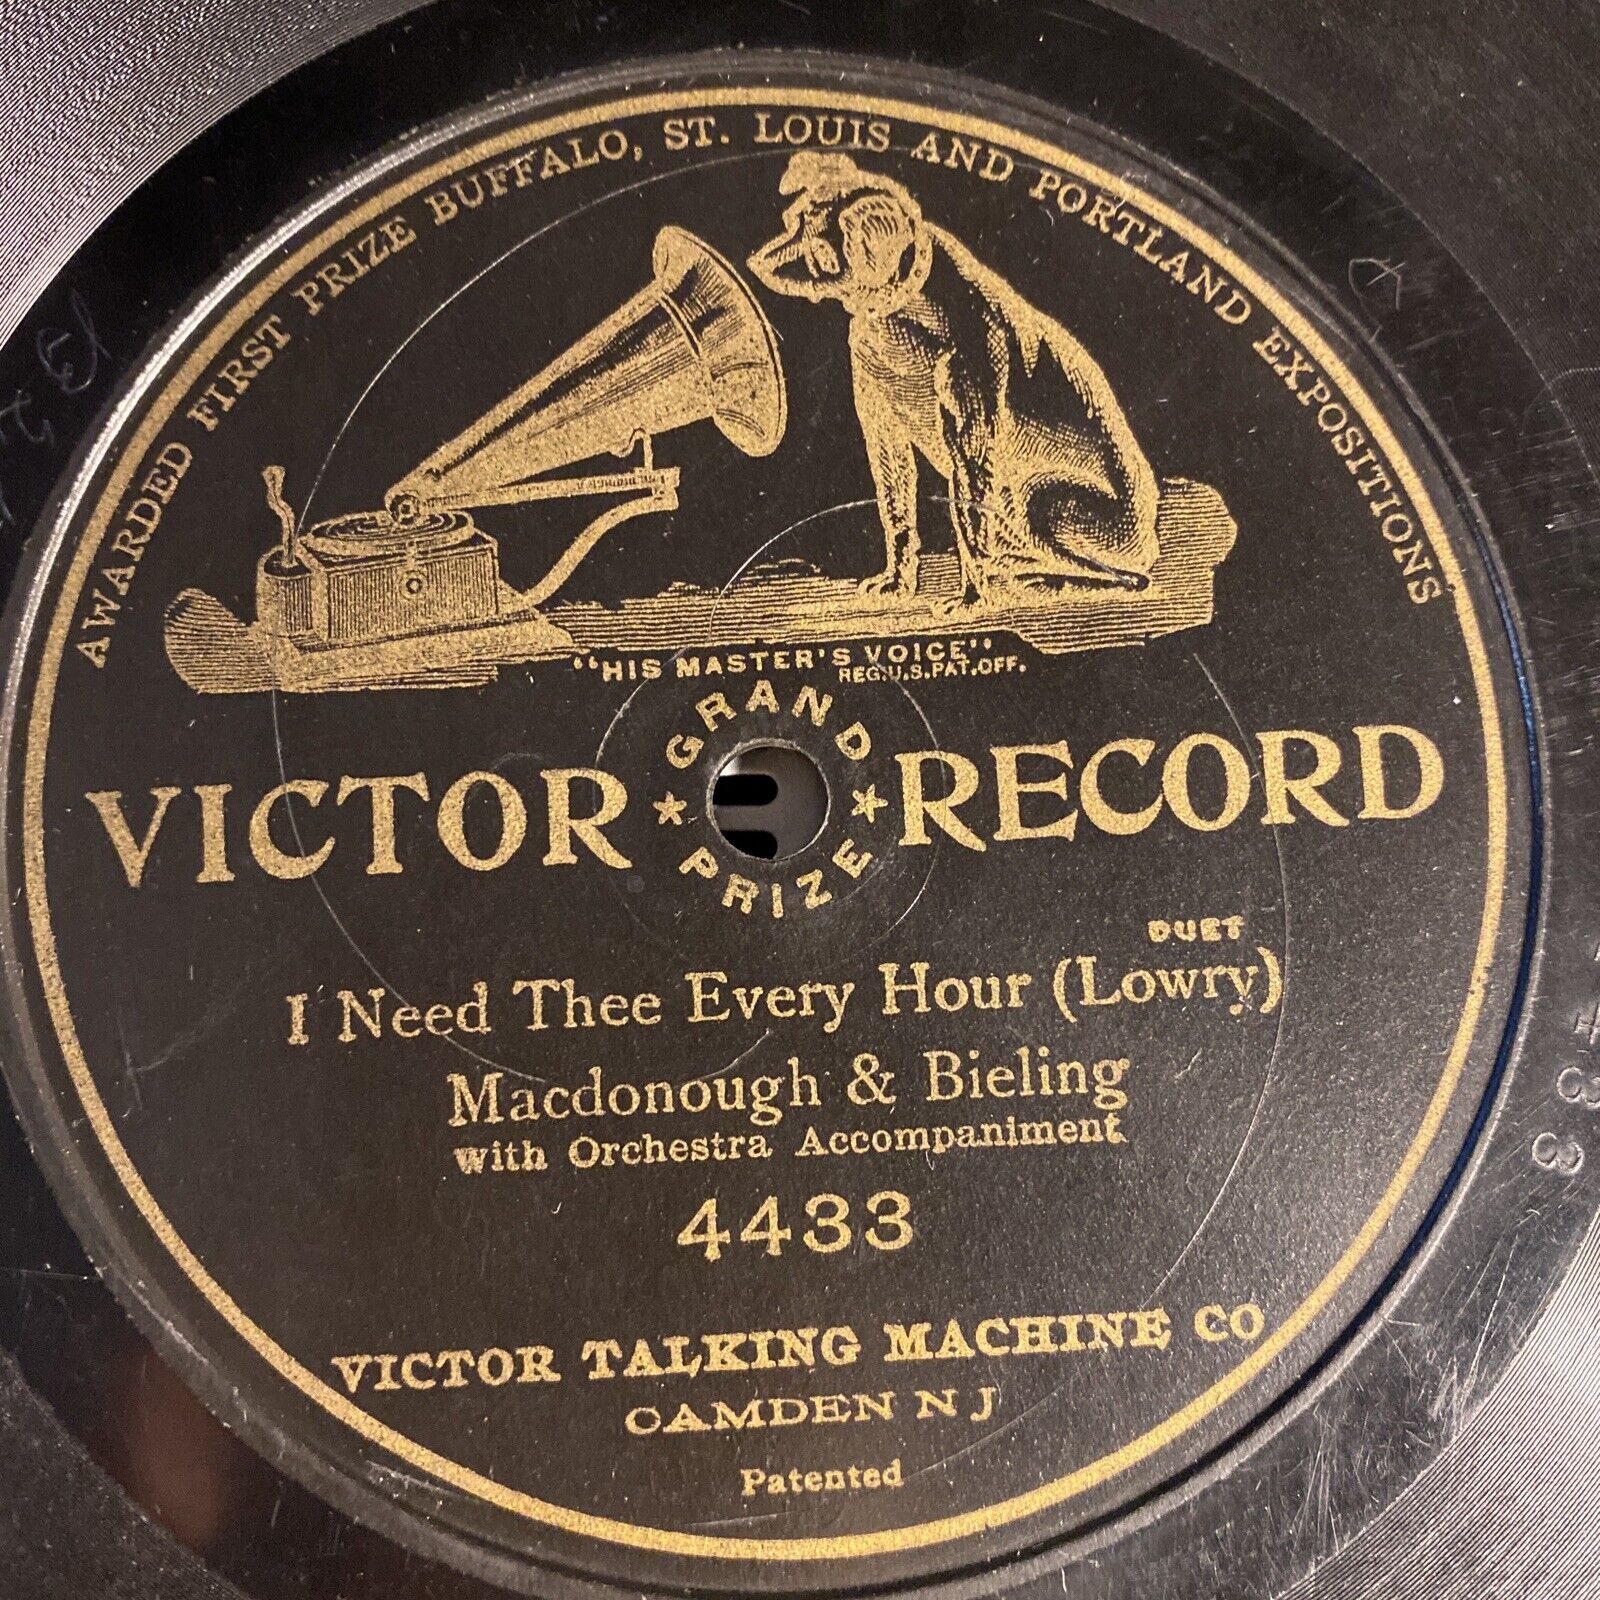 MACDONOUGH & BIELING 78 rpm VICTOR 4433  I NEED THEE EVERY HOUR tenor duet 1905